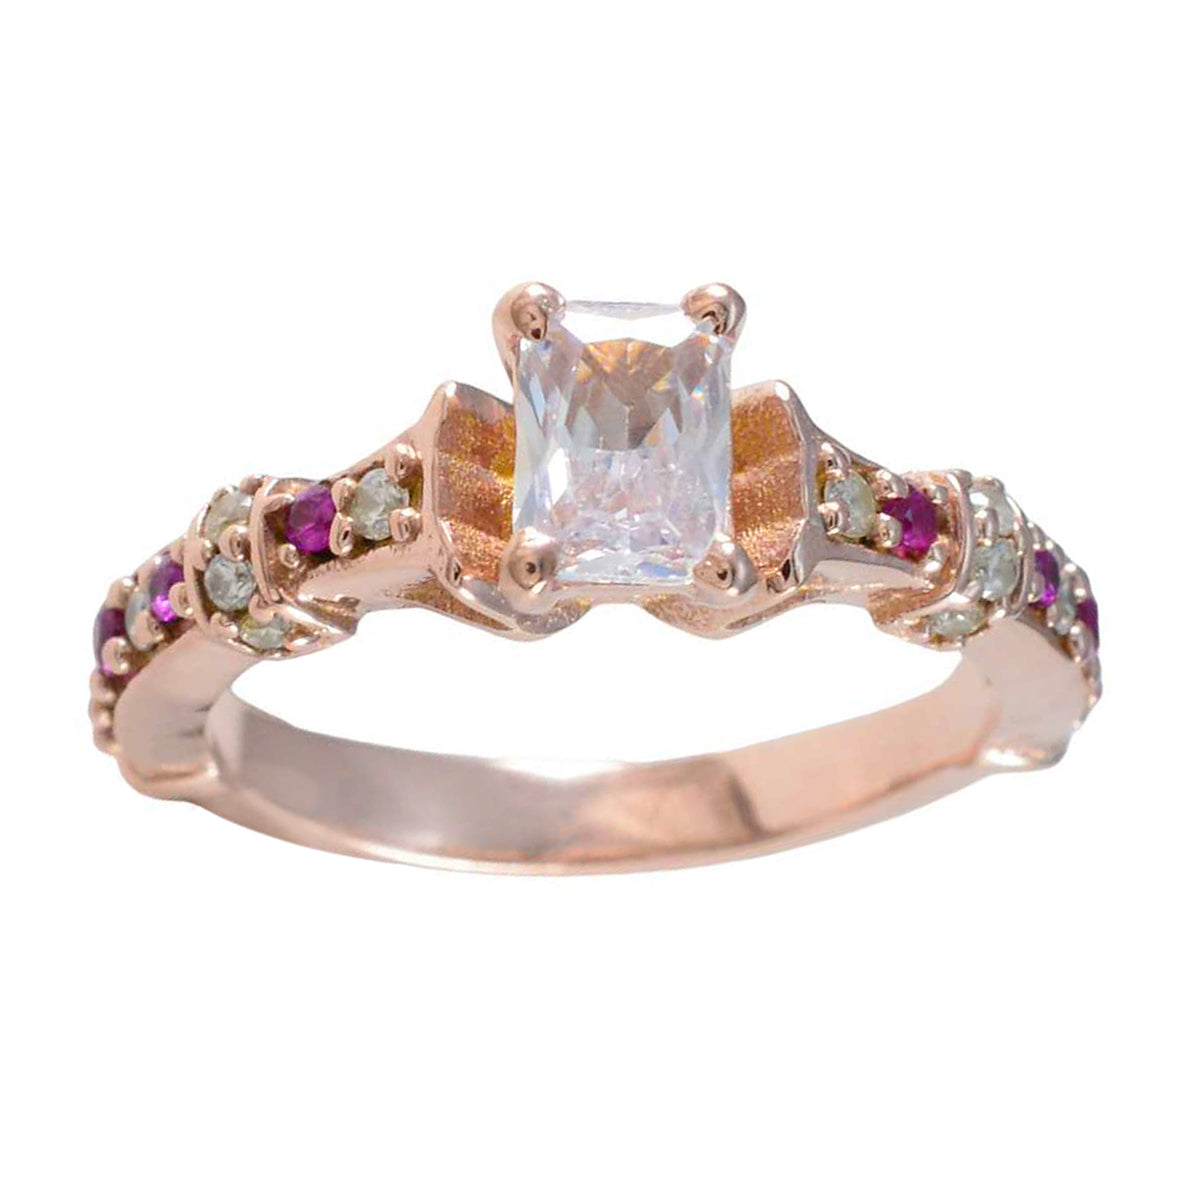 Riyo Charming Silver Ring With Rose Gold Plating Ruby CZ Stone Octagon Shape Prong Setting Fashion Jewelry Cocktail Ring